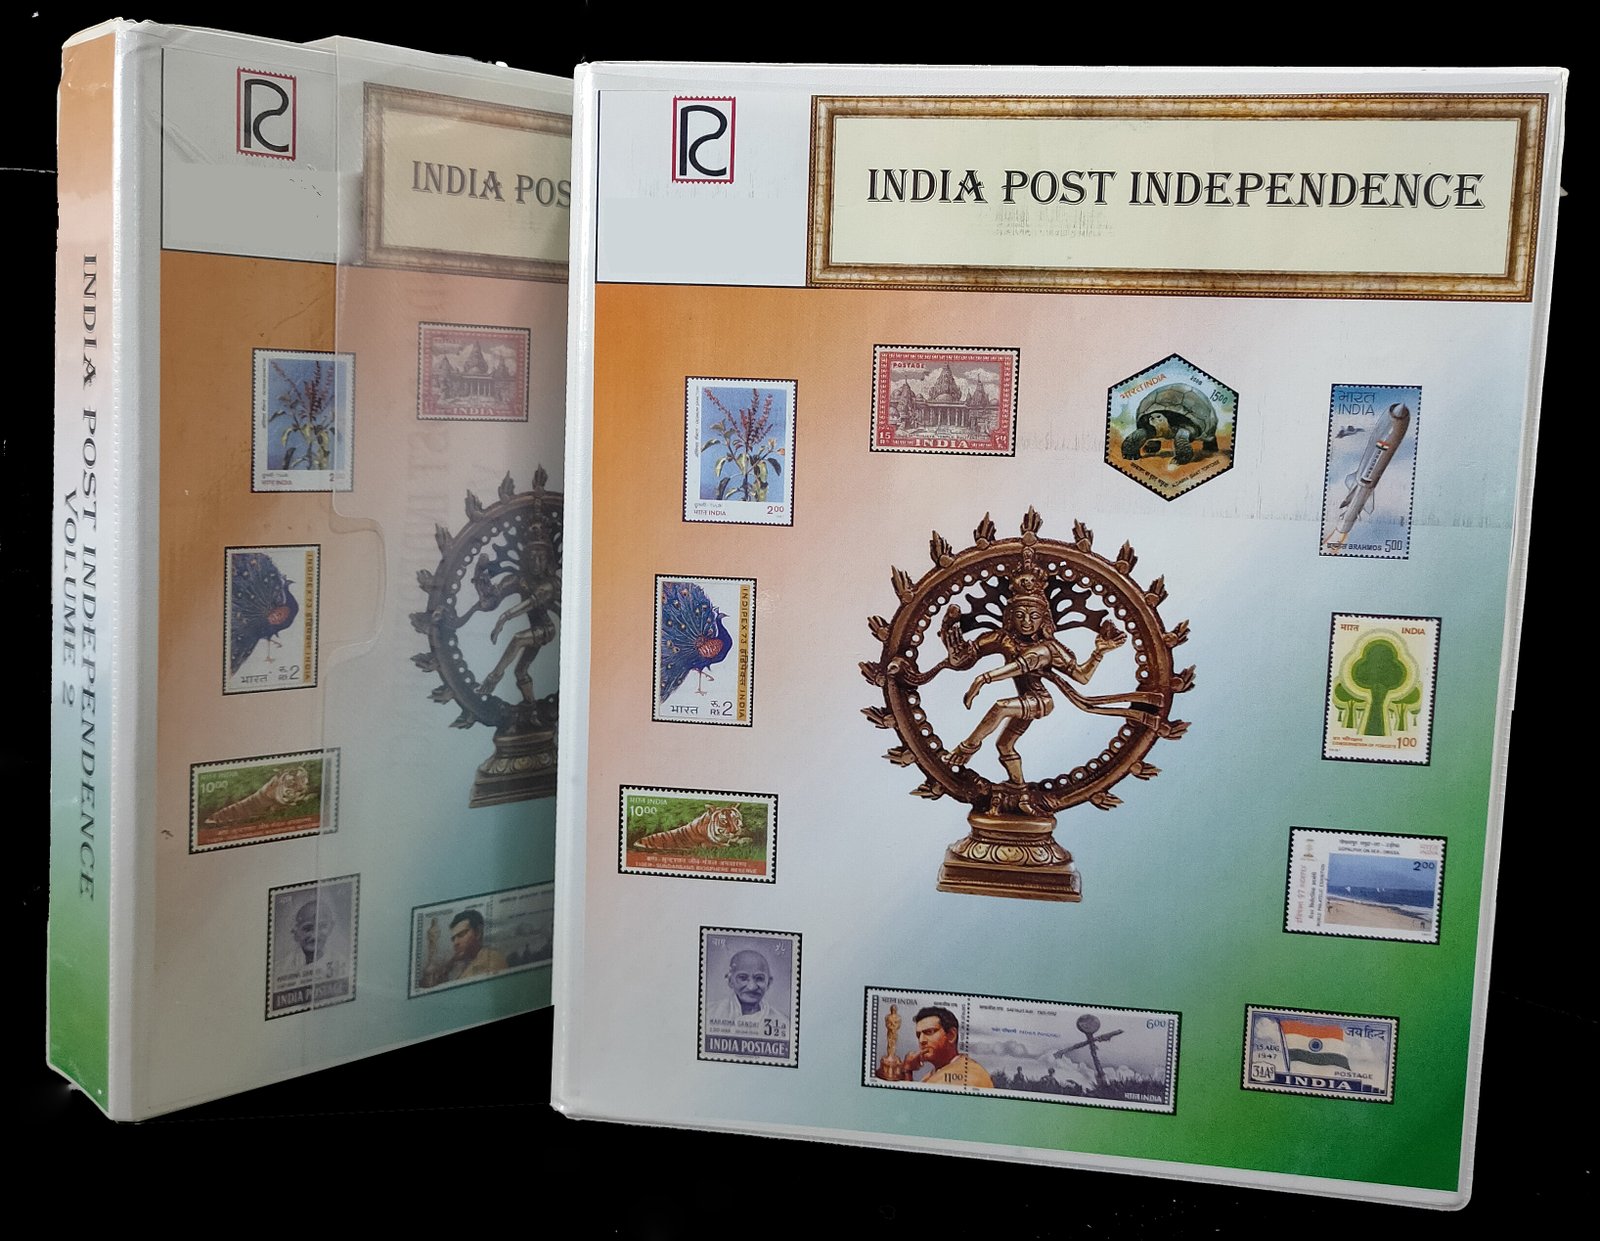 INDIA POST 1947-2019 including Definitive, Military Stamp Official 195 Pages-'A' Series (ALBUM WITH ONLY ILLUSTRATIONS , STAMPS NOT INCLUDED WITH ALBUM)